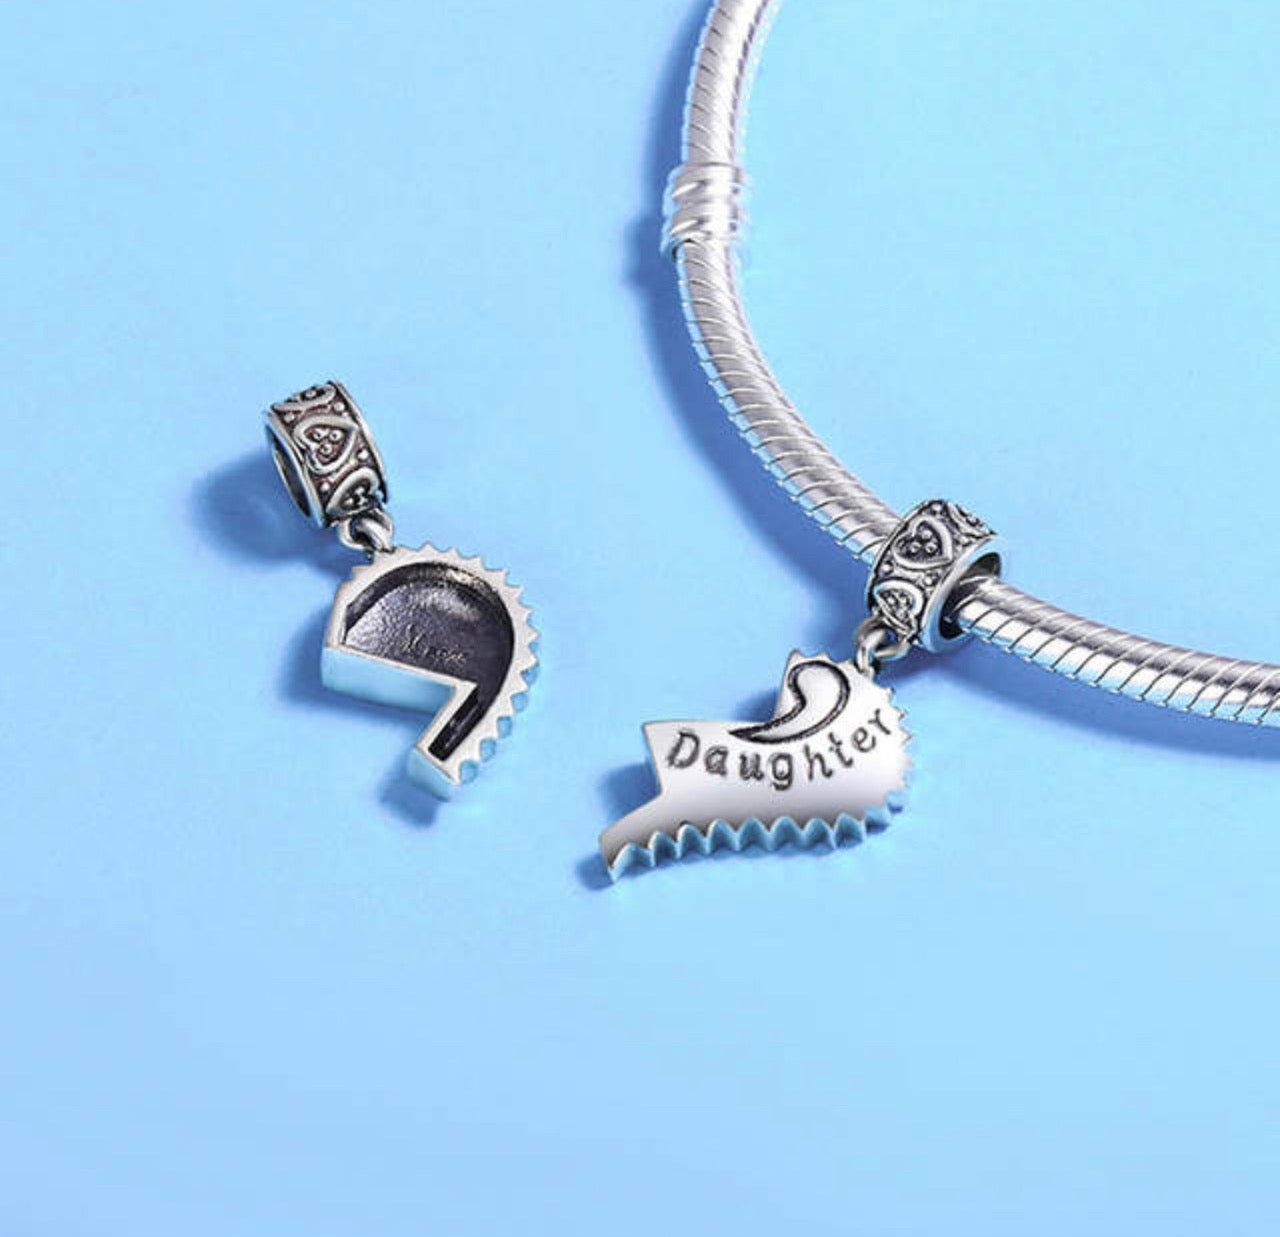 MOTHER/DAUGHTER SPECIAL BOND CHARMS 2 IN 1